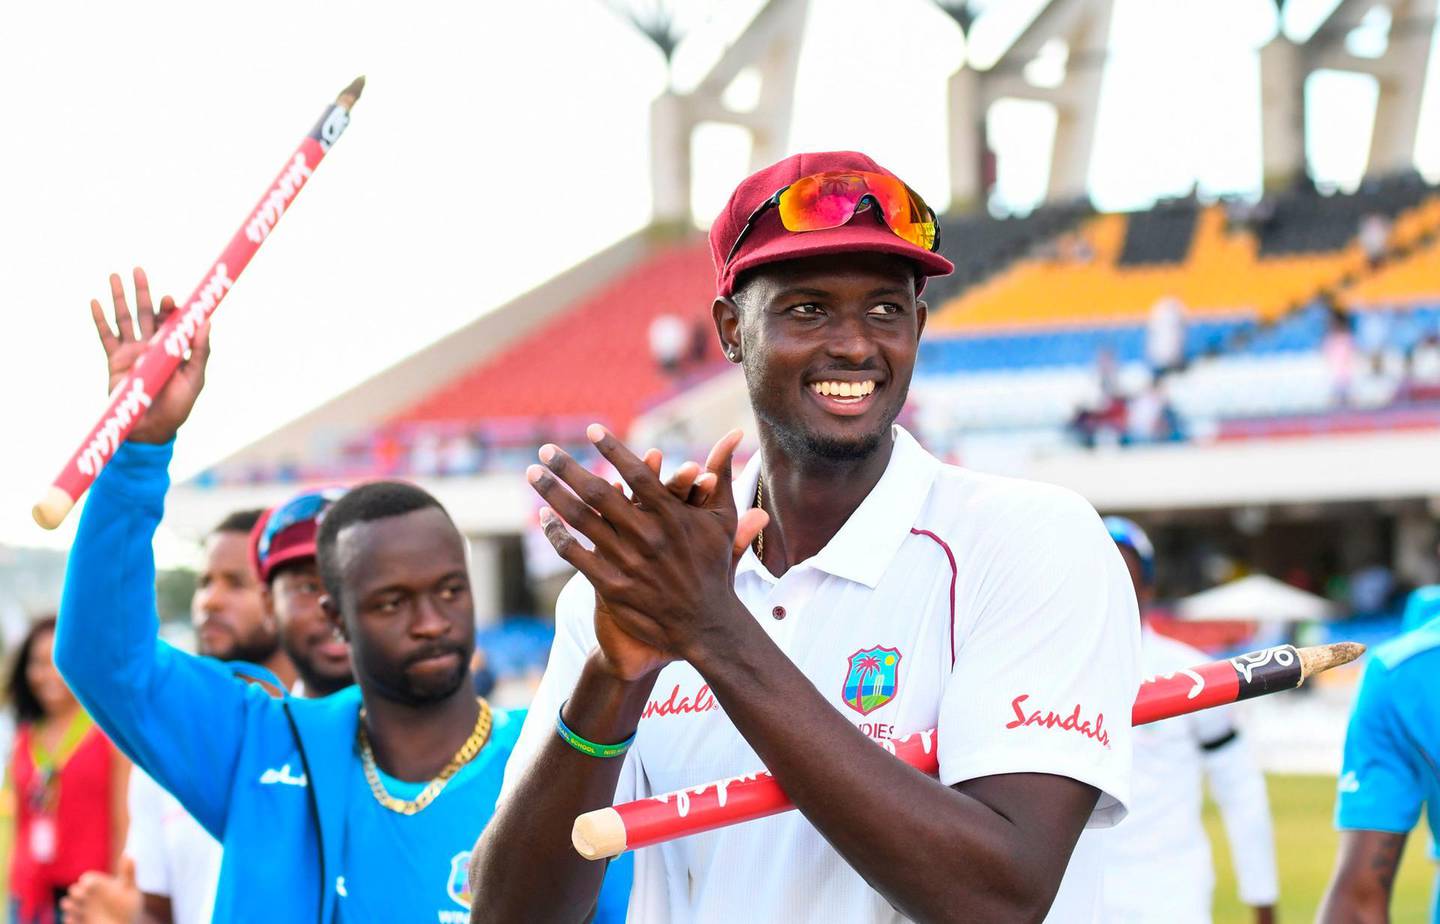 (FILES) In this file photo taken on February 2, 2019 Jason Holder (R) of West Indies celebrates winning on day 3 of the 2nd Test between West Indies and England at Vivian Richards Cricket Stadium in North Sound, Antigua and Barbuda. West Indies captain Jason Holder has been suspended for the third and final Test against England due to his team's slow over-rate during their victory in Antigua last week, the ICC announced on February 4, 2019. Cricket's governing body banned Holder, despite the hosts playing four seamers and the regular fall of wickets as England were bowled out for 187 and 132.The ICC said in a statement that the Windies were two overs short of their target for the match.
 / AFP / Randy Brooks
